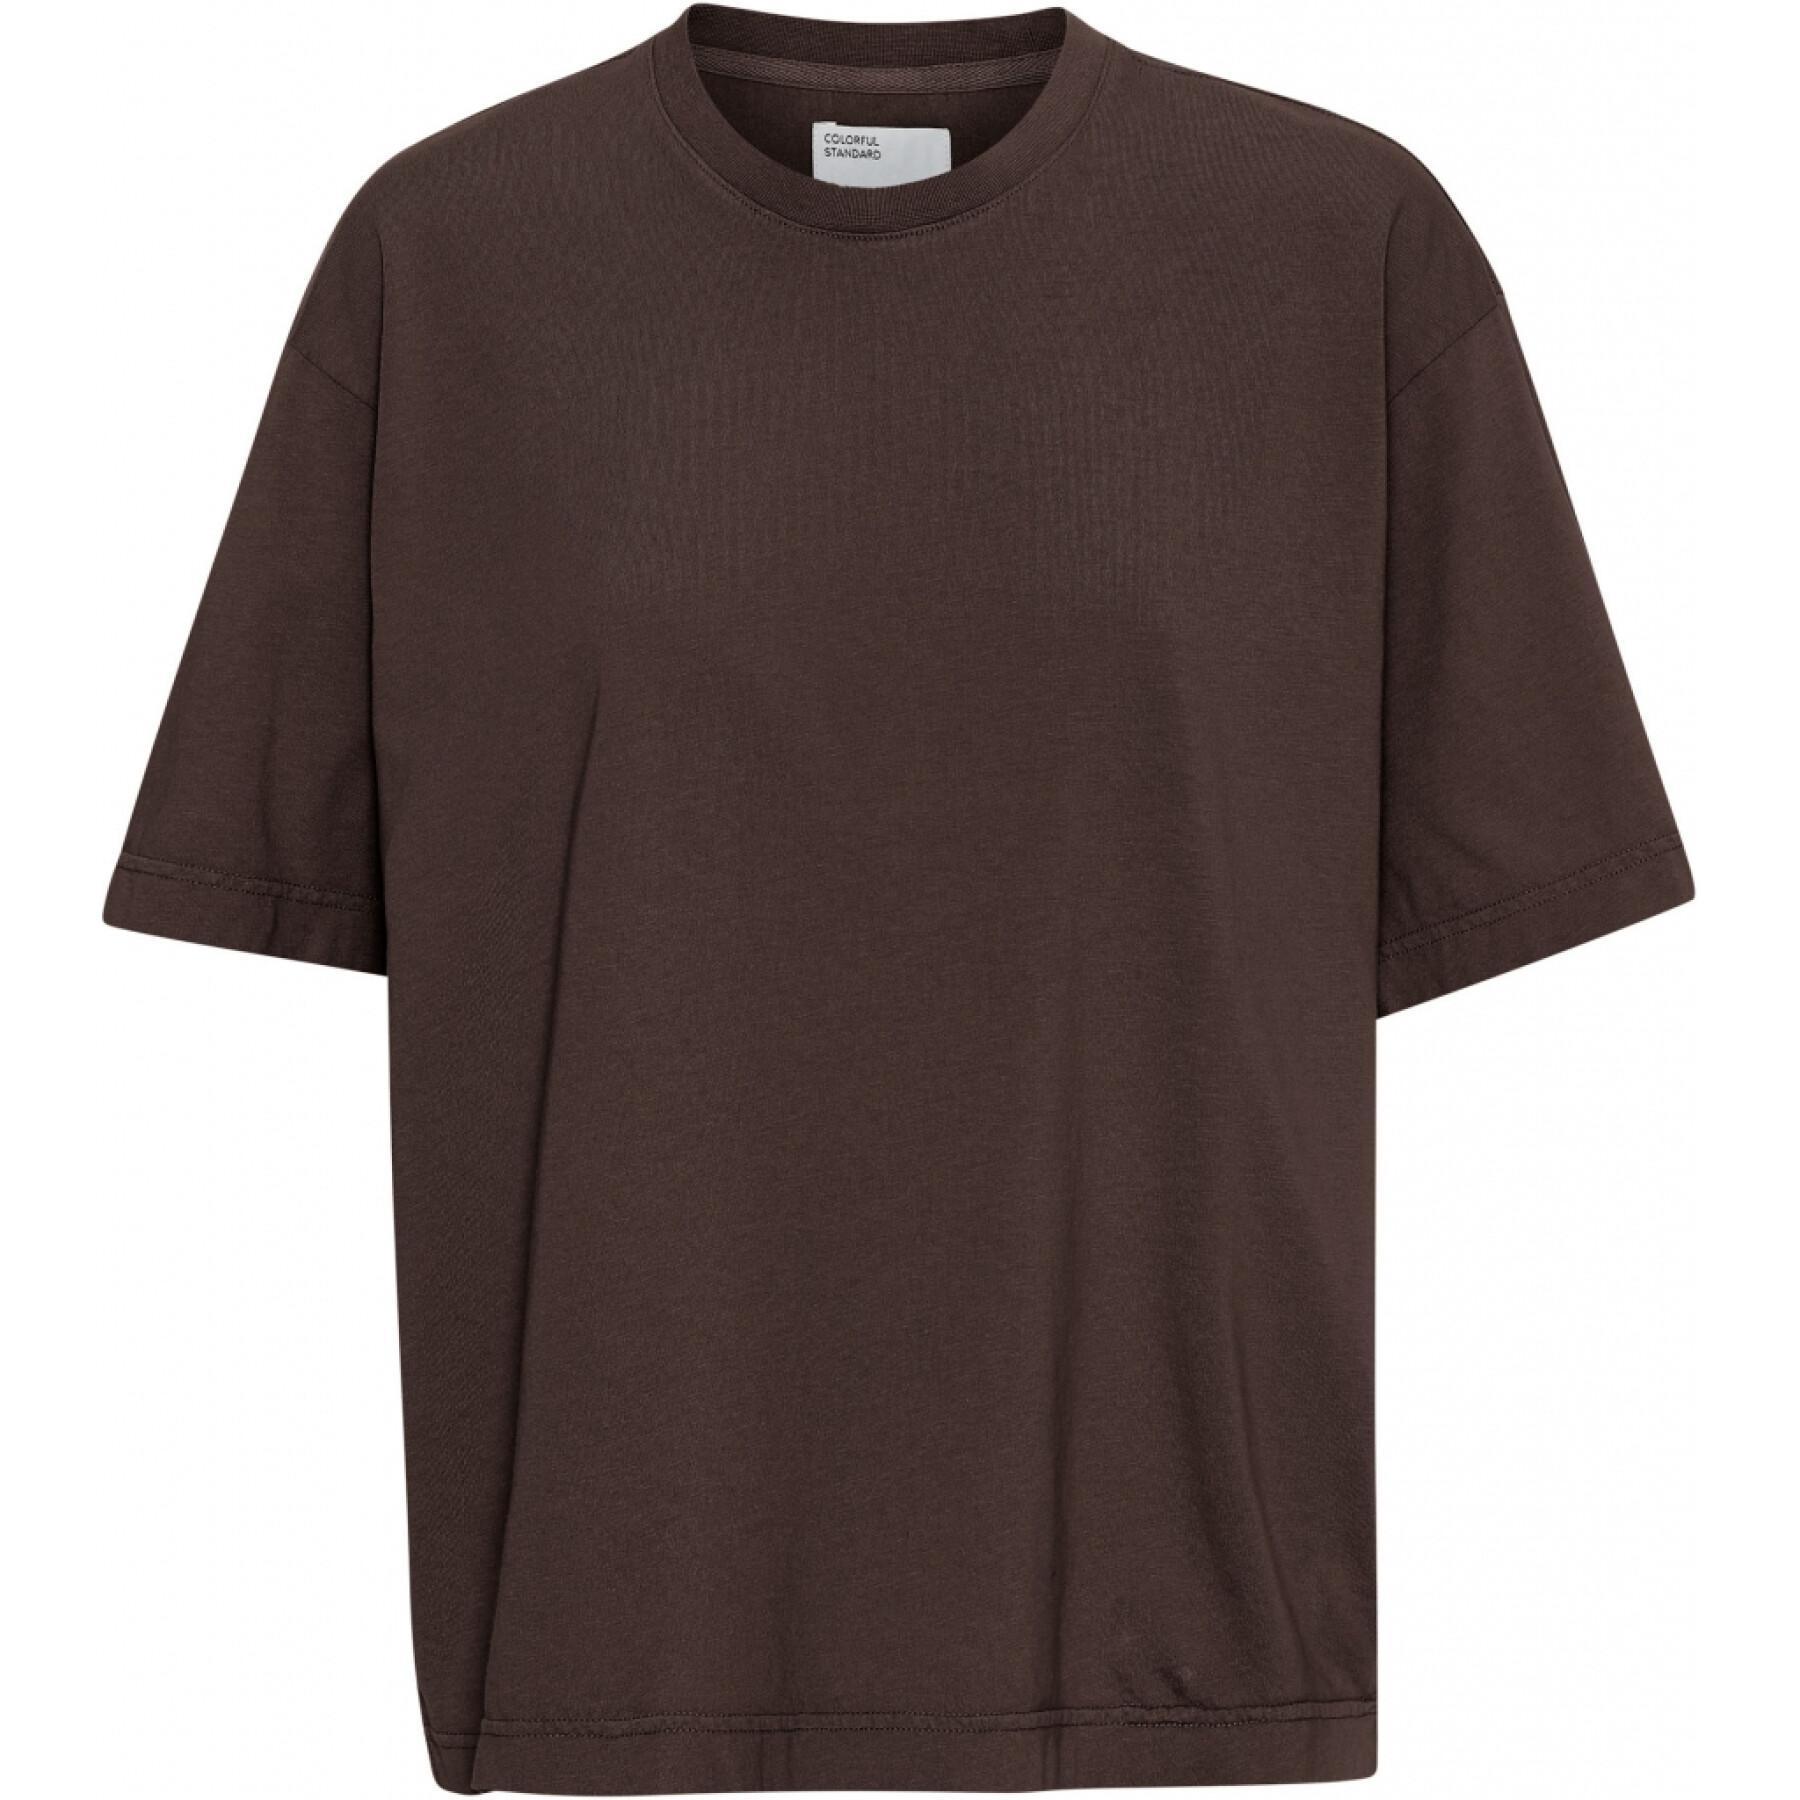 Dames-T-shirt Colorful Standard Organic oversized coffee brown